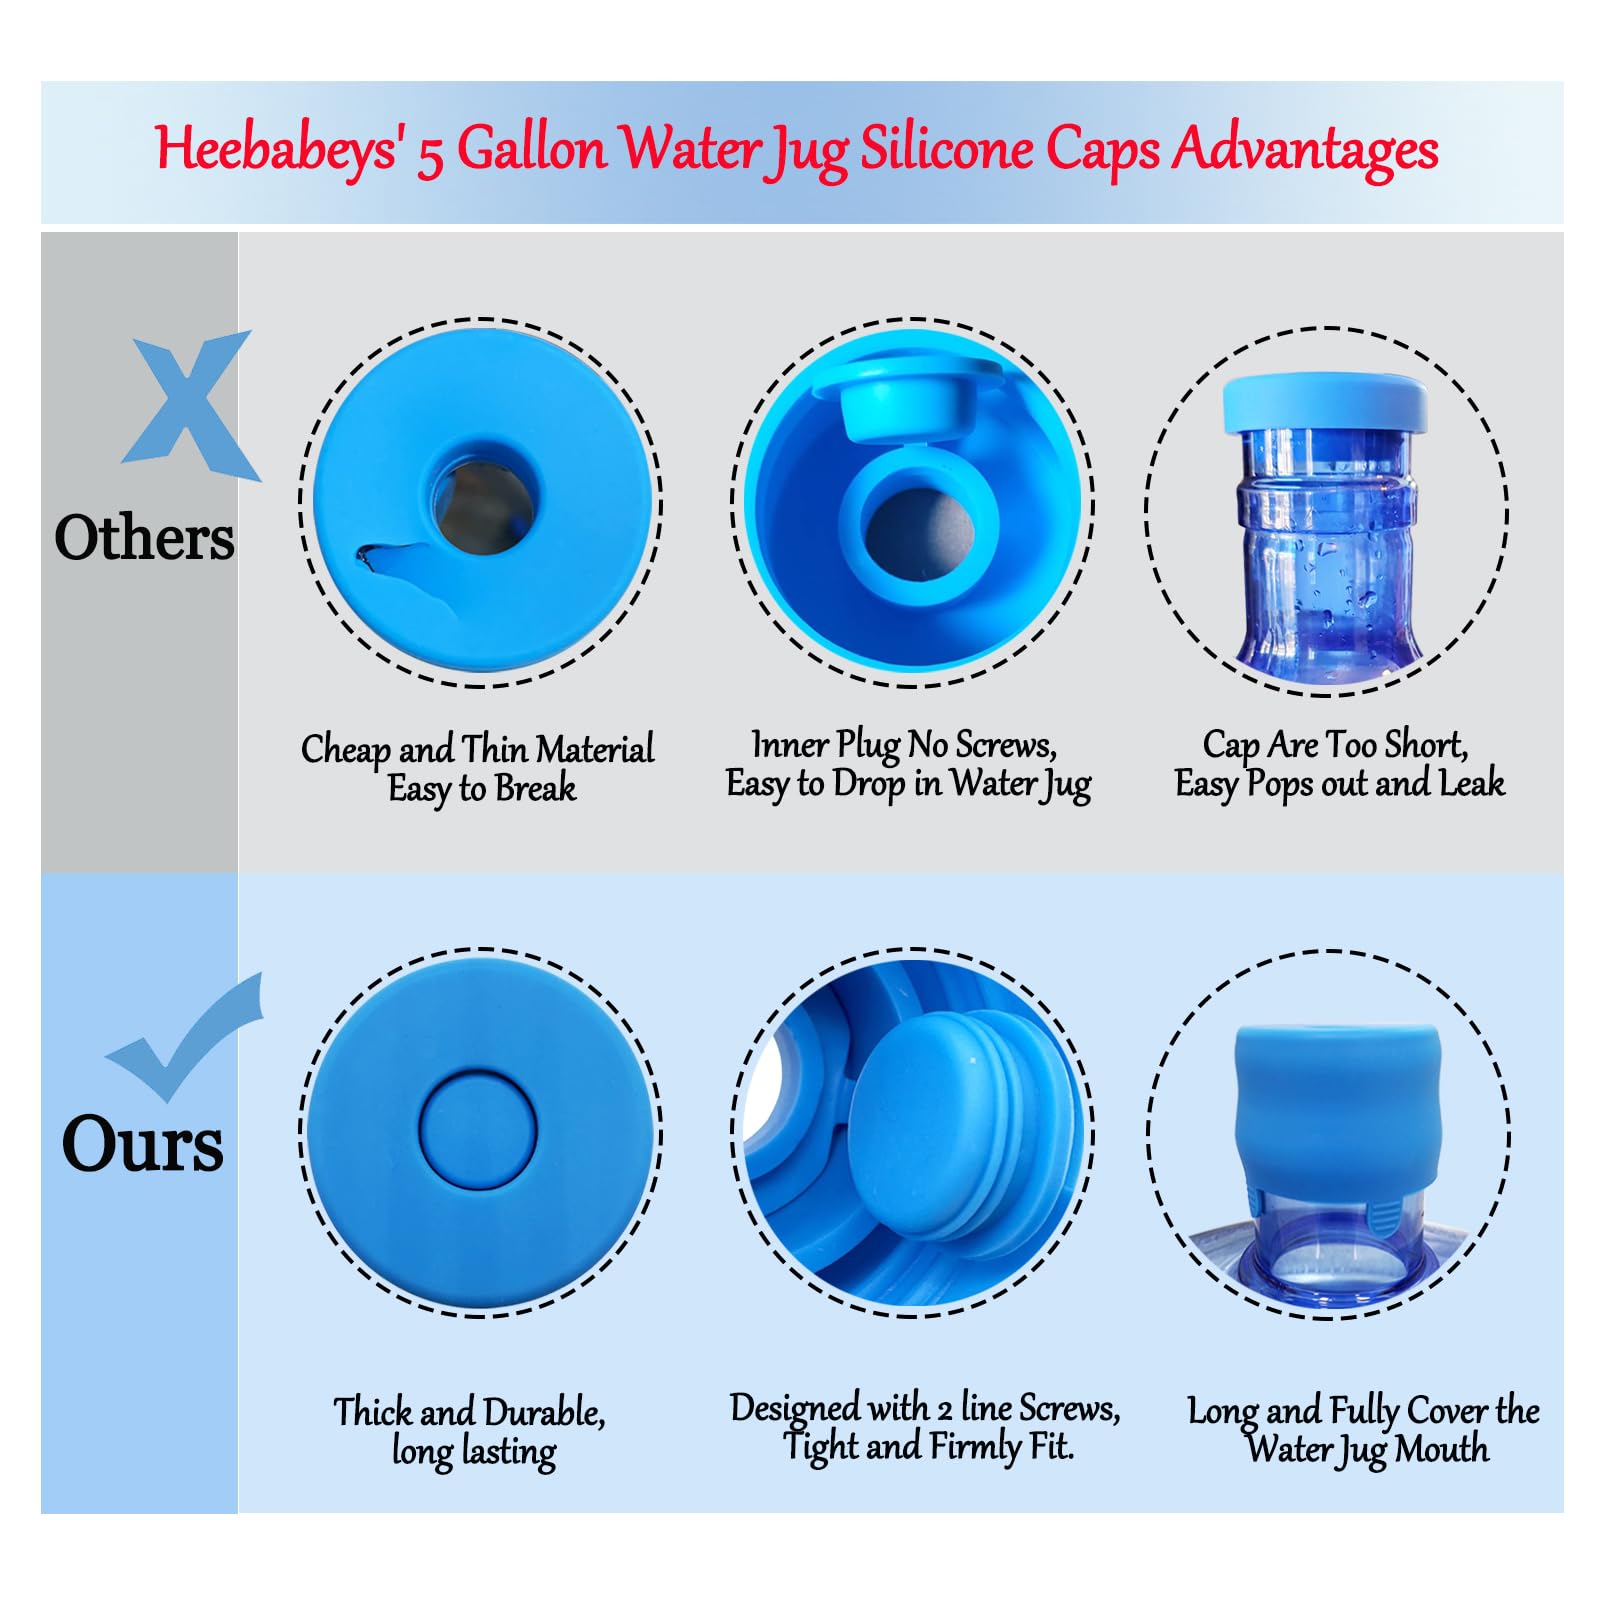 Upgraded 5 Gallon Water Jug Cap, 4 Pieces Reusable Silicone 5 Gallon Water Bottle Caps, Godsent Reusable Replacement Caps for Water Jug Containers, Leak Proof Bottle Caps Fit 55mm Water Bottle Jugs.